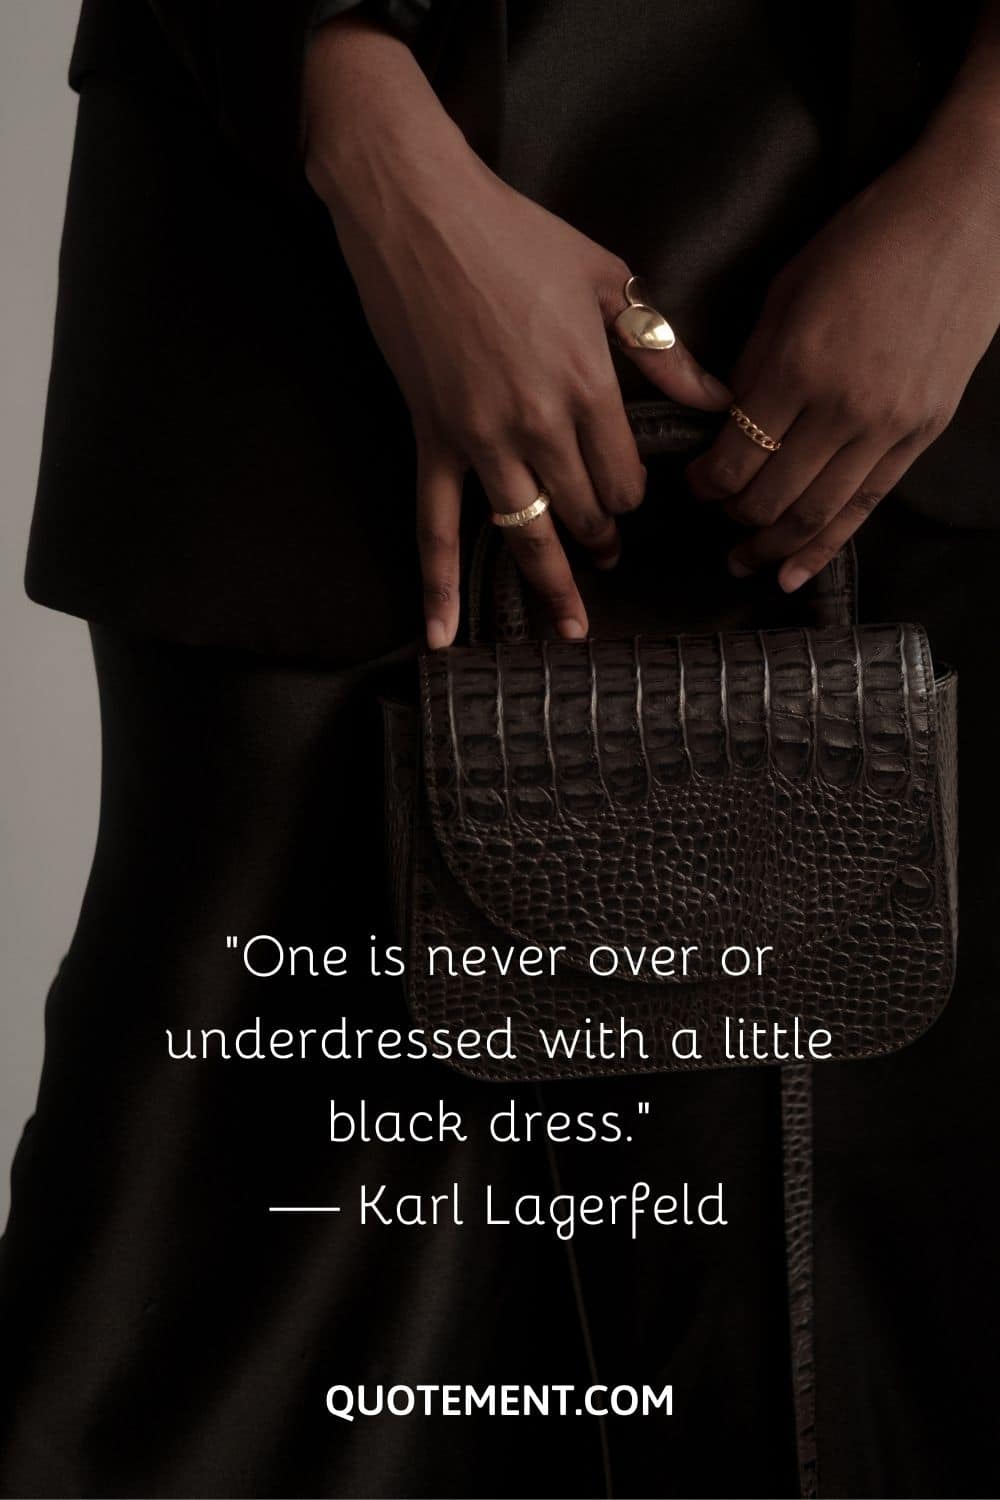 One is never over or underdressed with a little black dress.